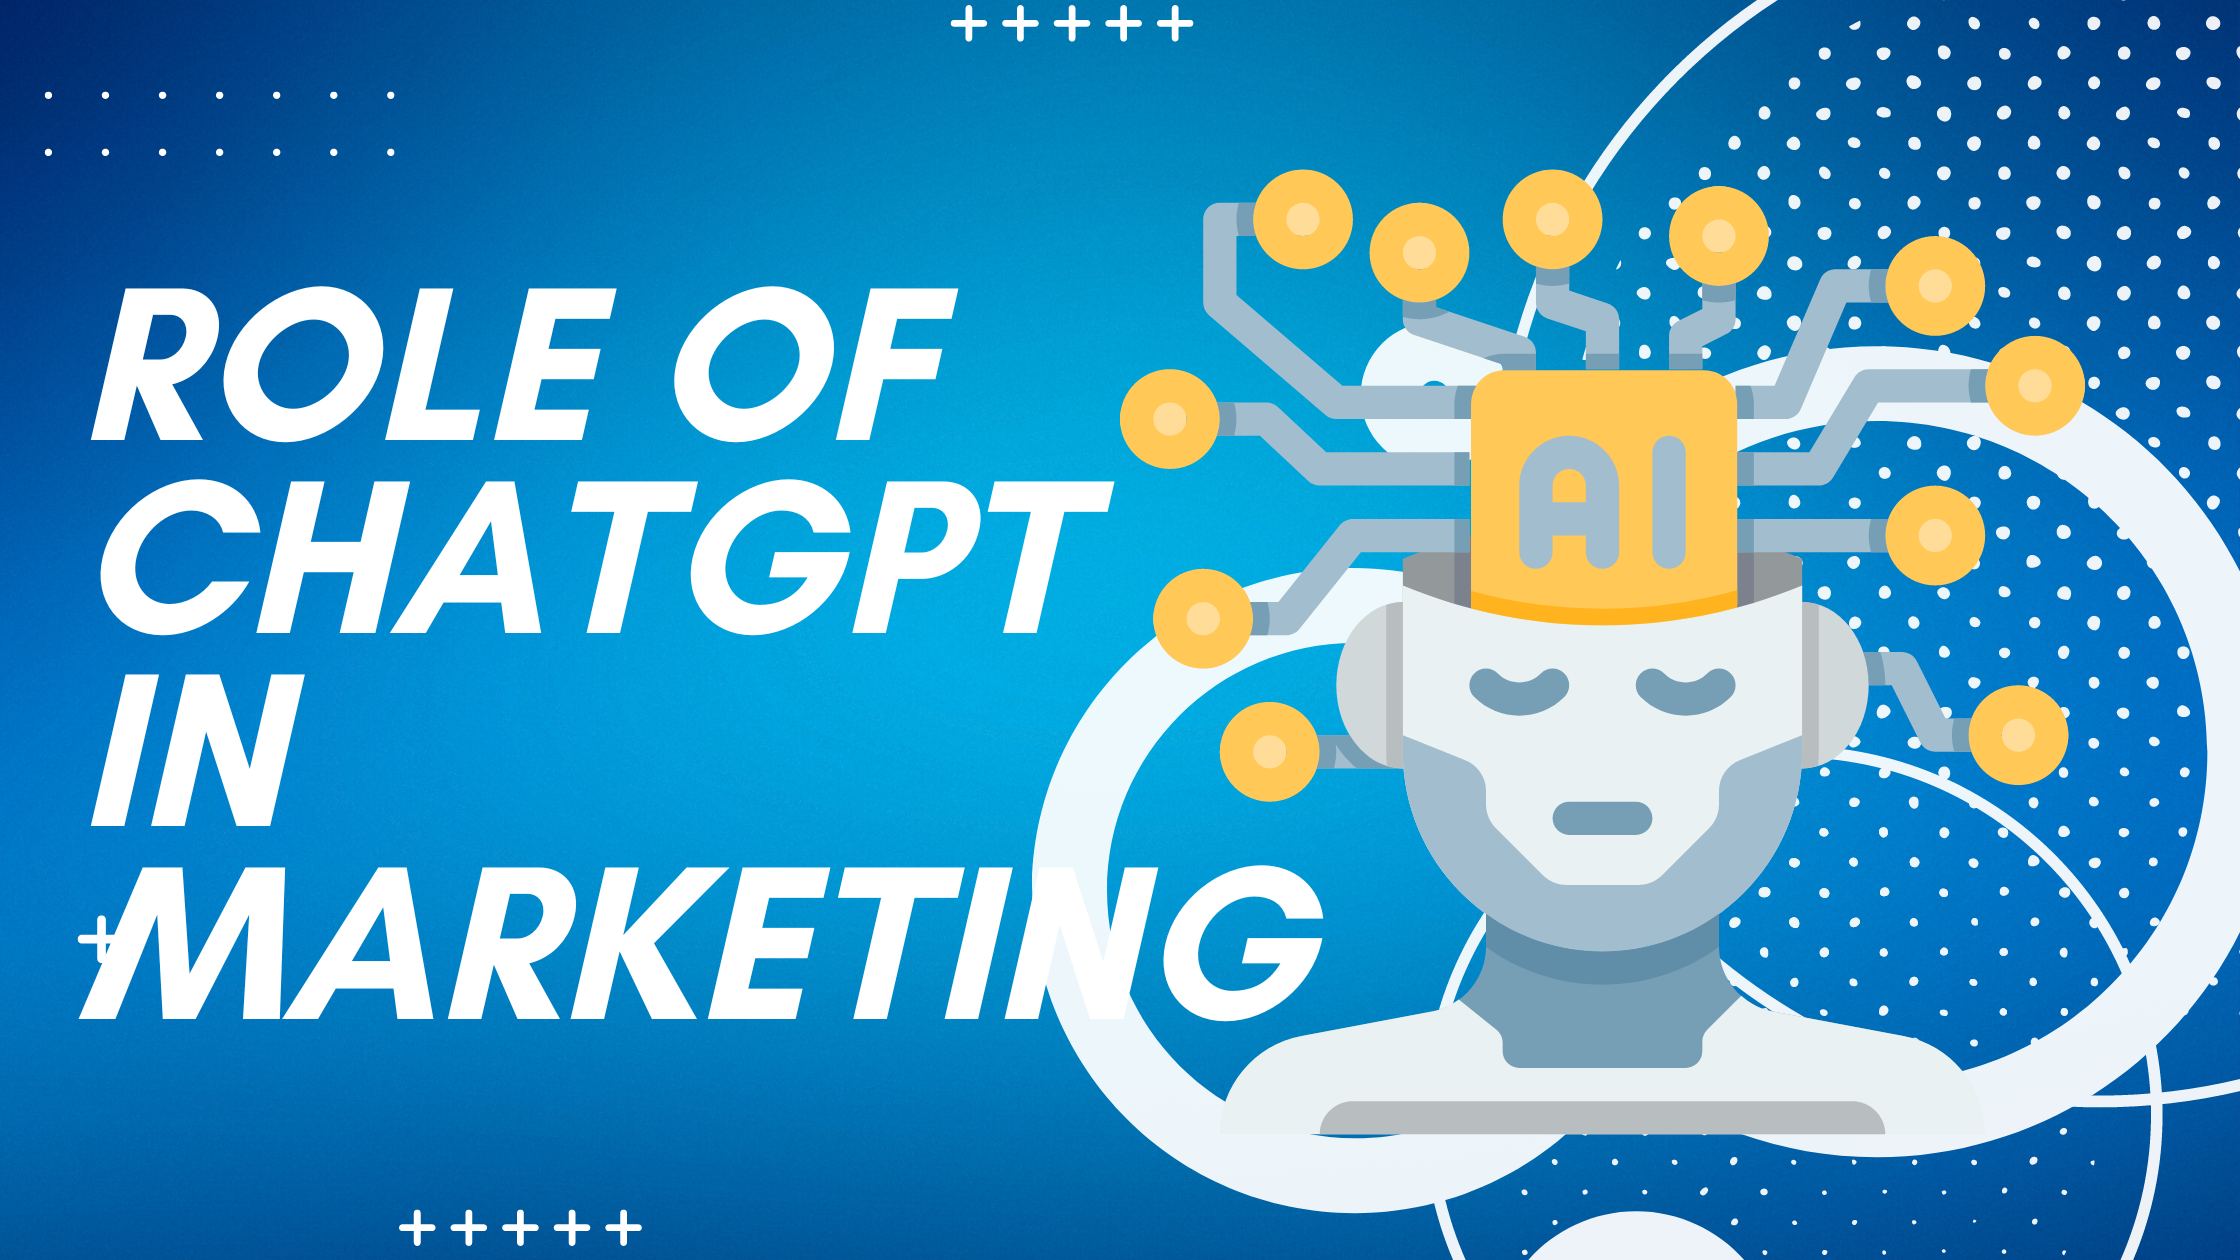 5 Outstanding ways to level up marketing using ChatGPT